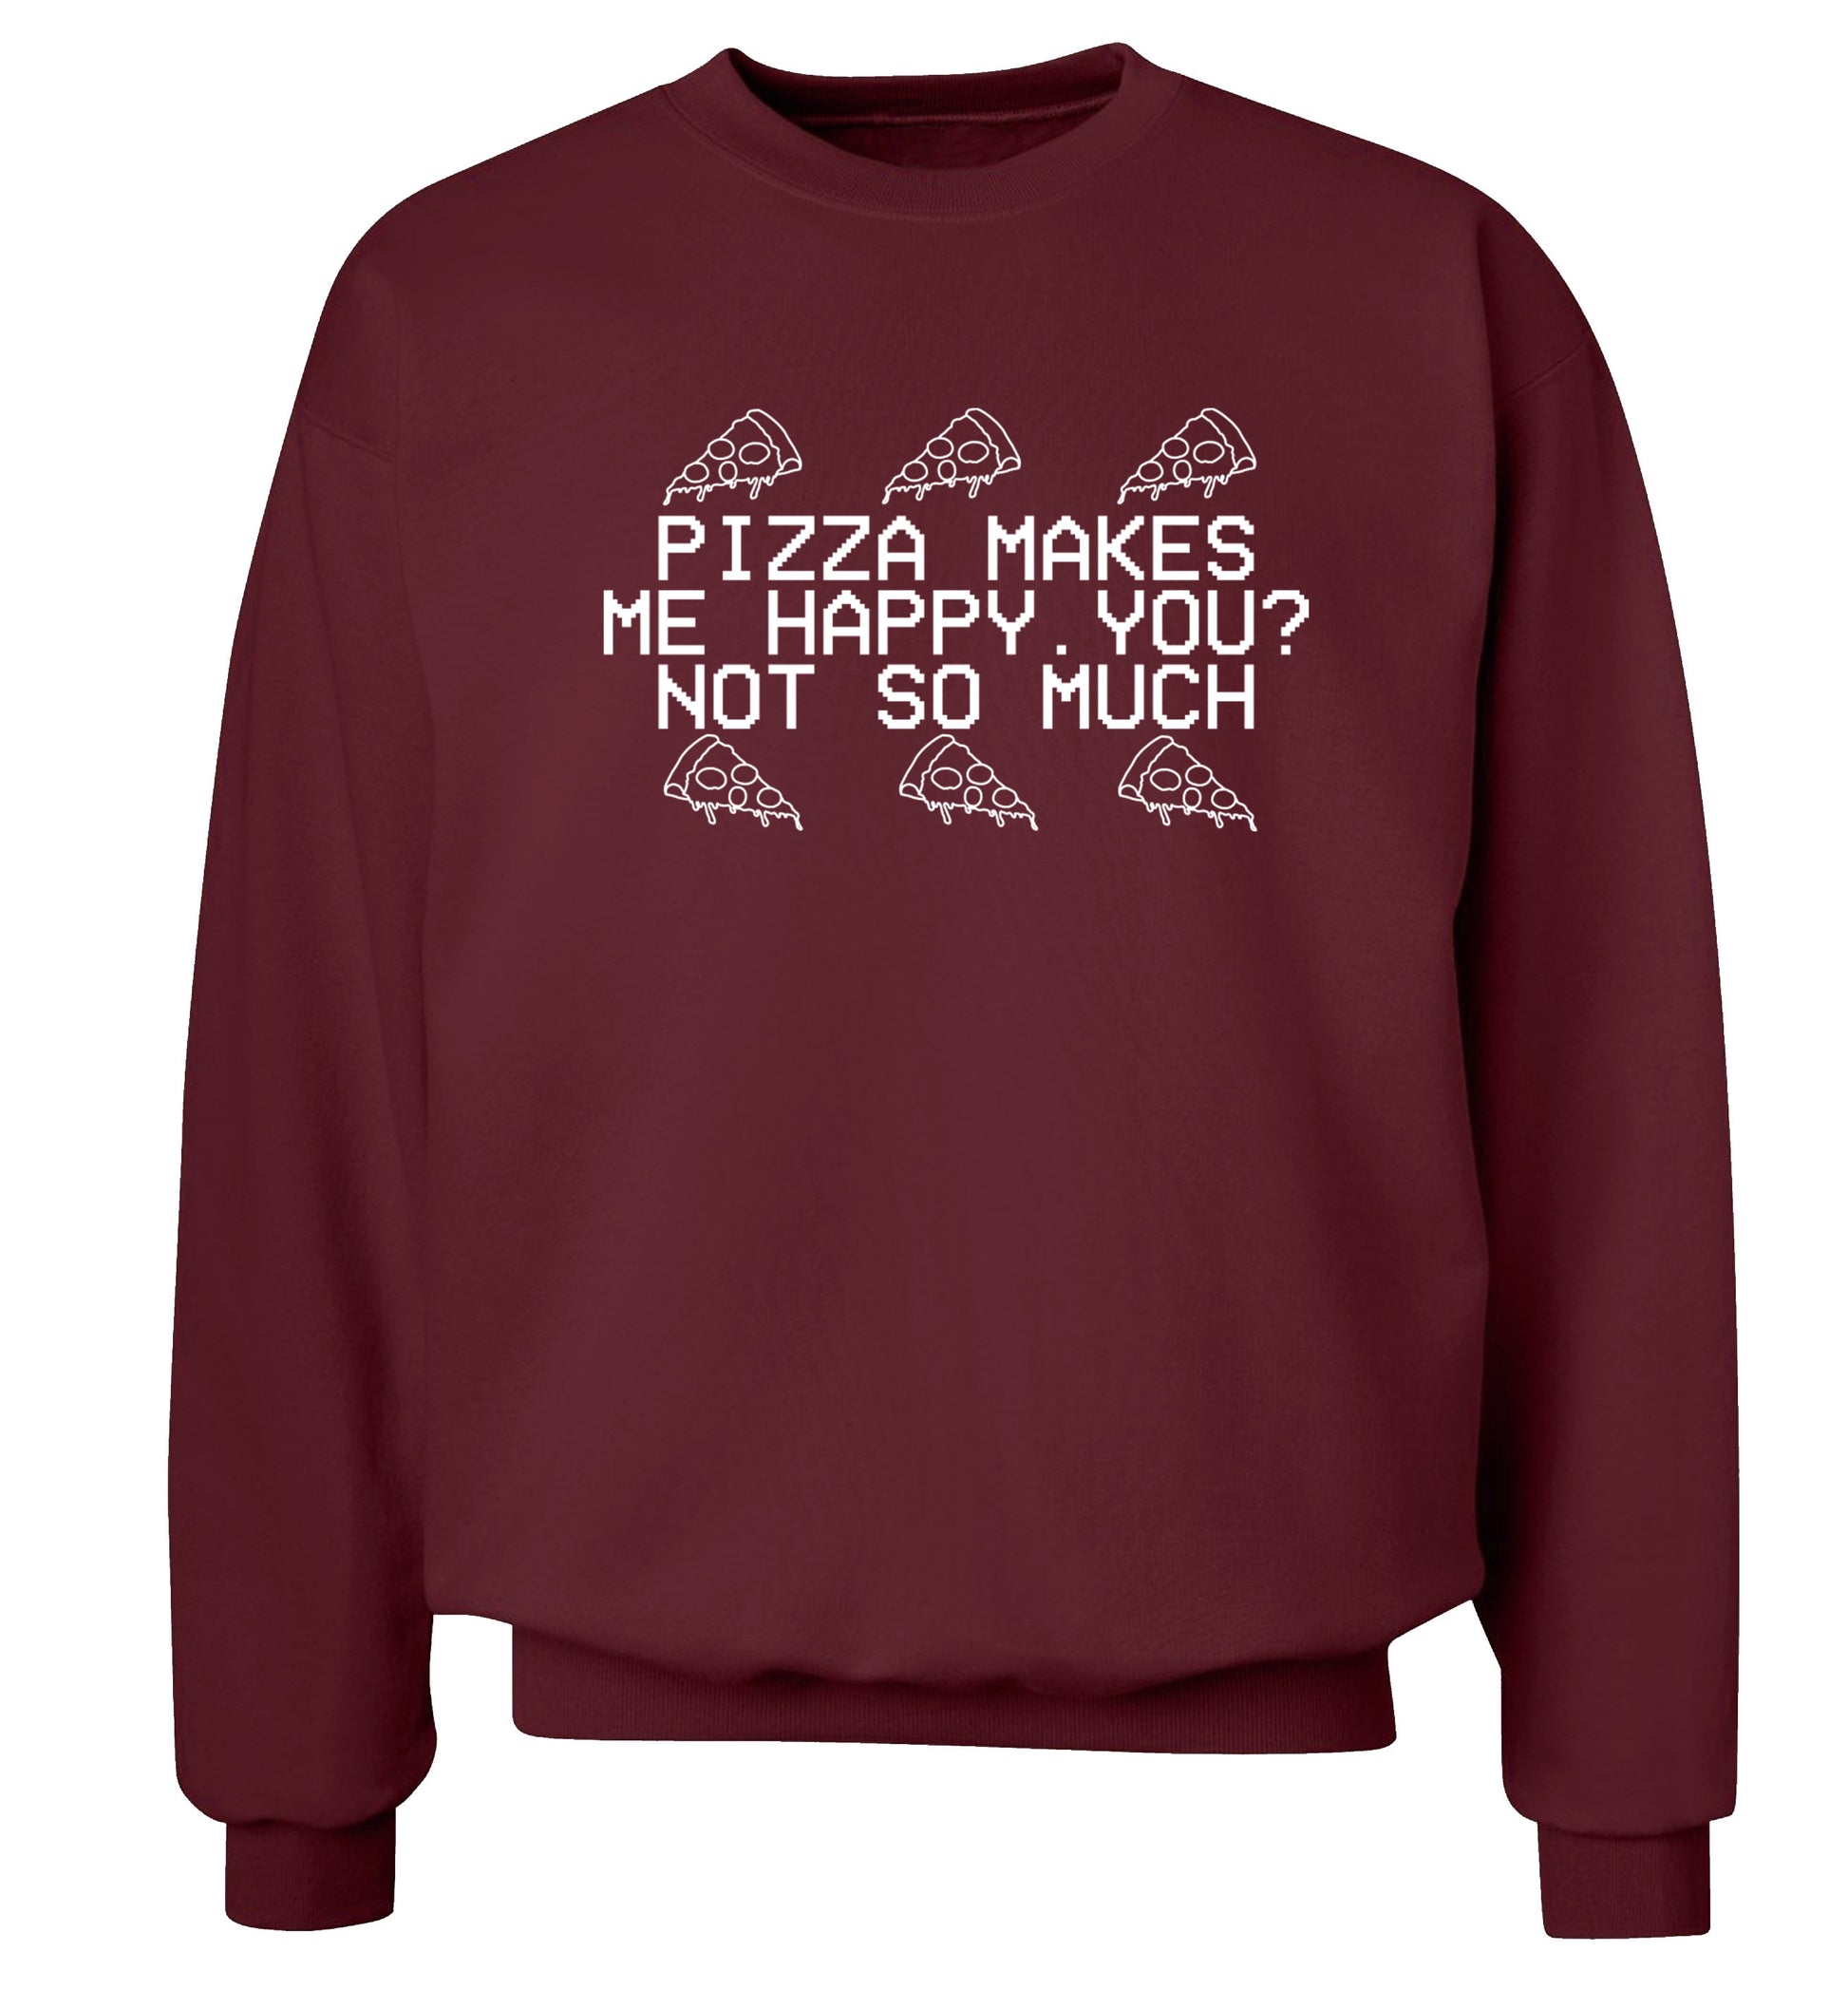 Pizza makes me happy, You? Not so much Adult's unisex maroon  sweater 2XL